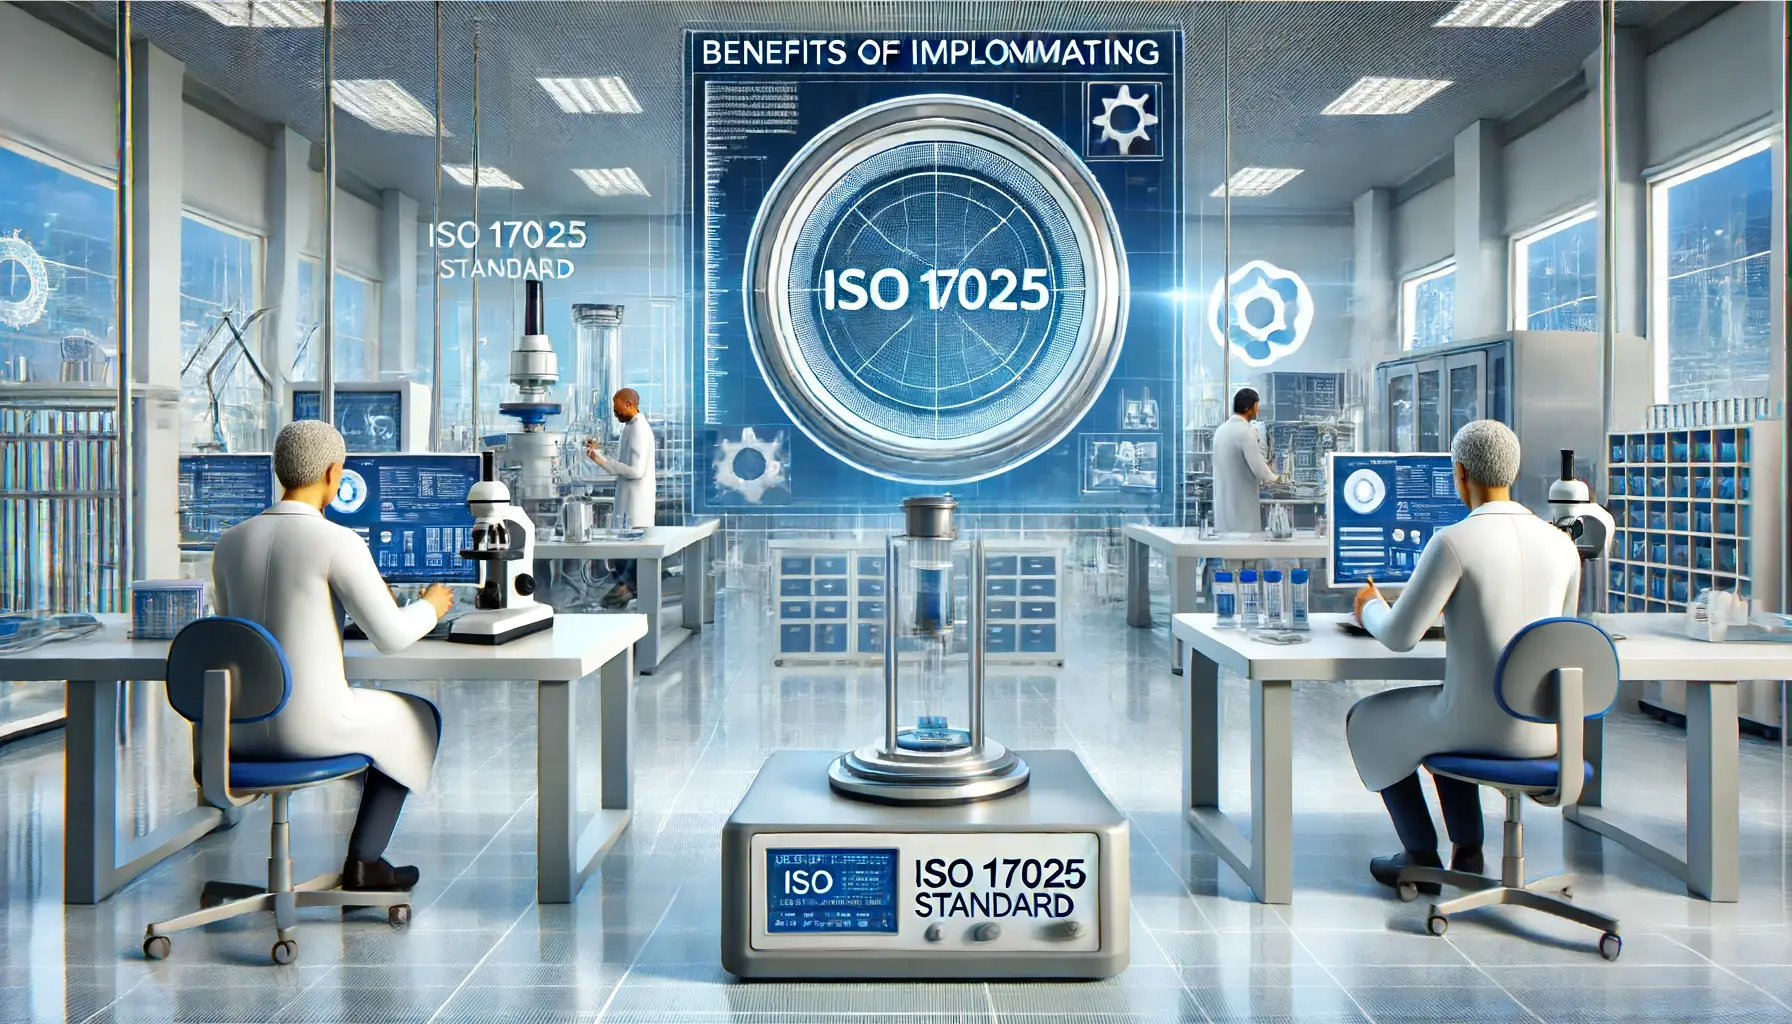 Benefits of Implementing ISO 17025 Standard